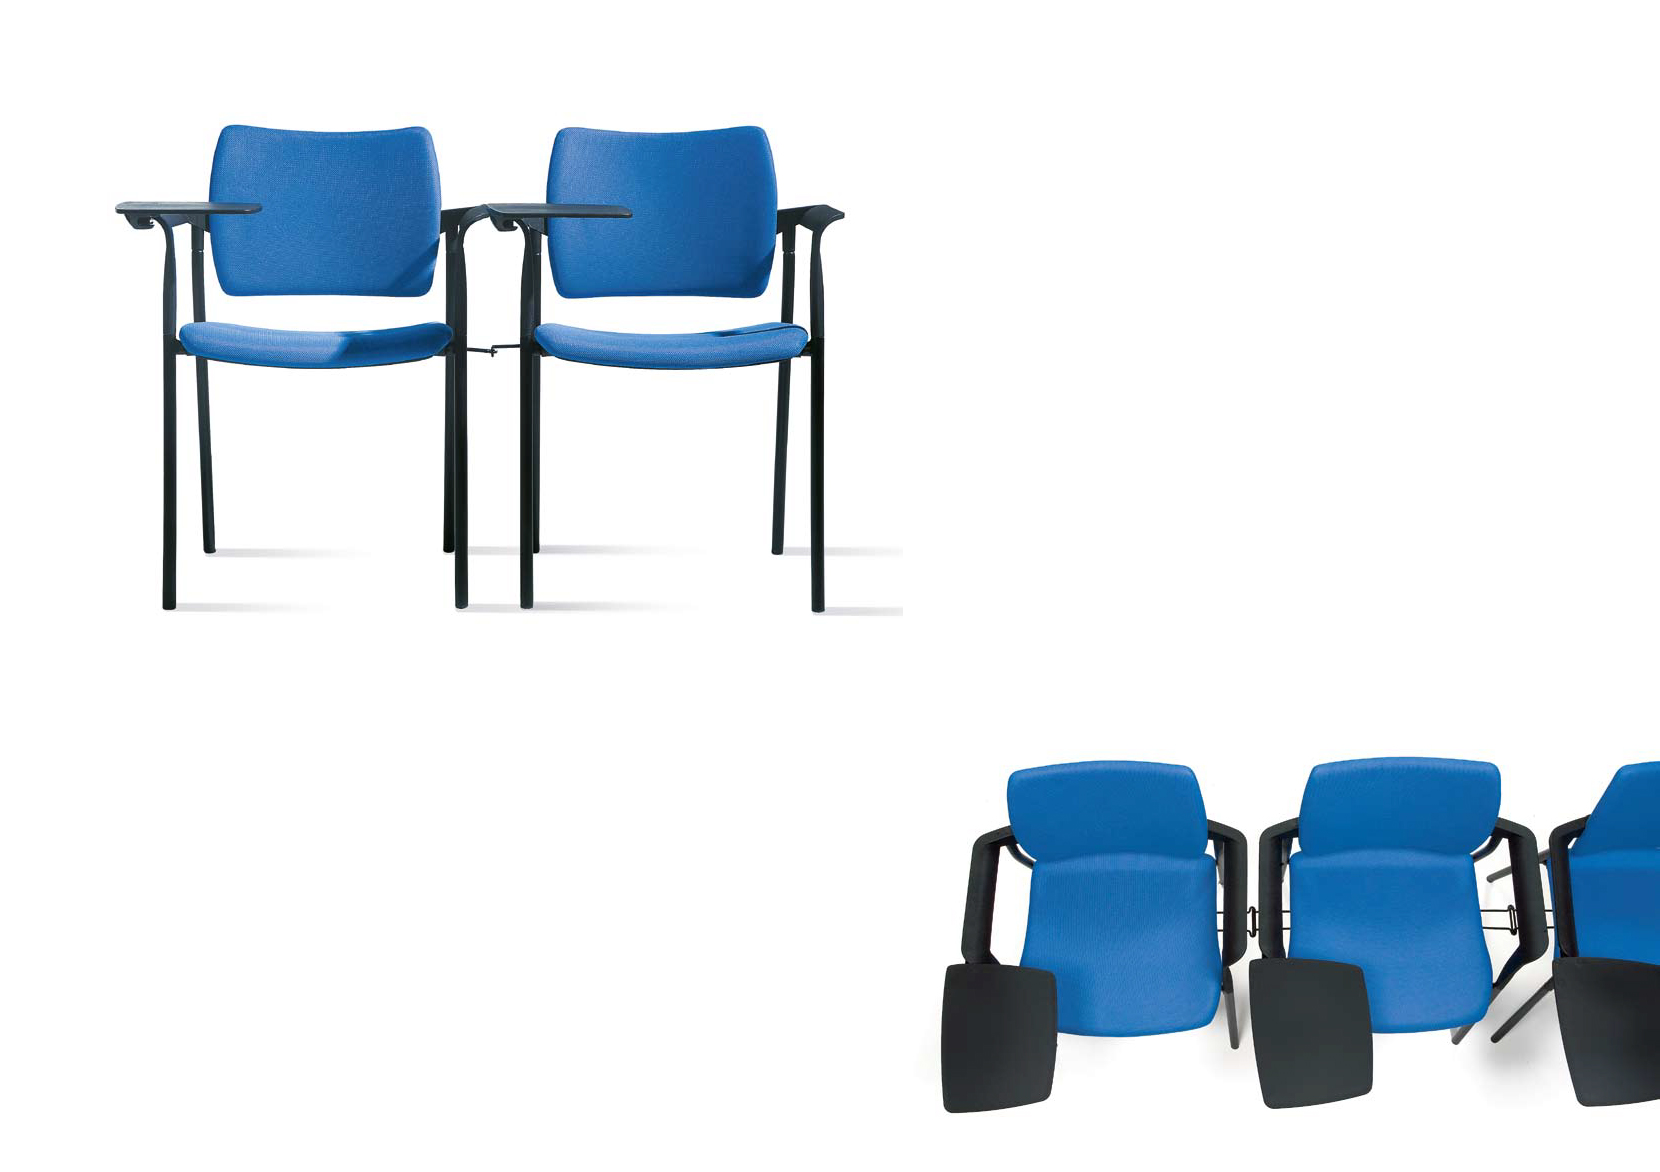 Dream - Meeting, conference and waiting room chairs - Cerantola - 4